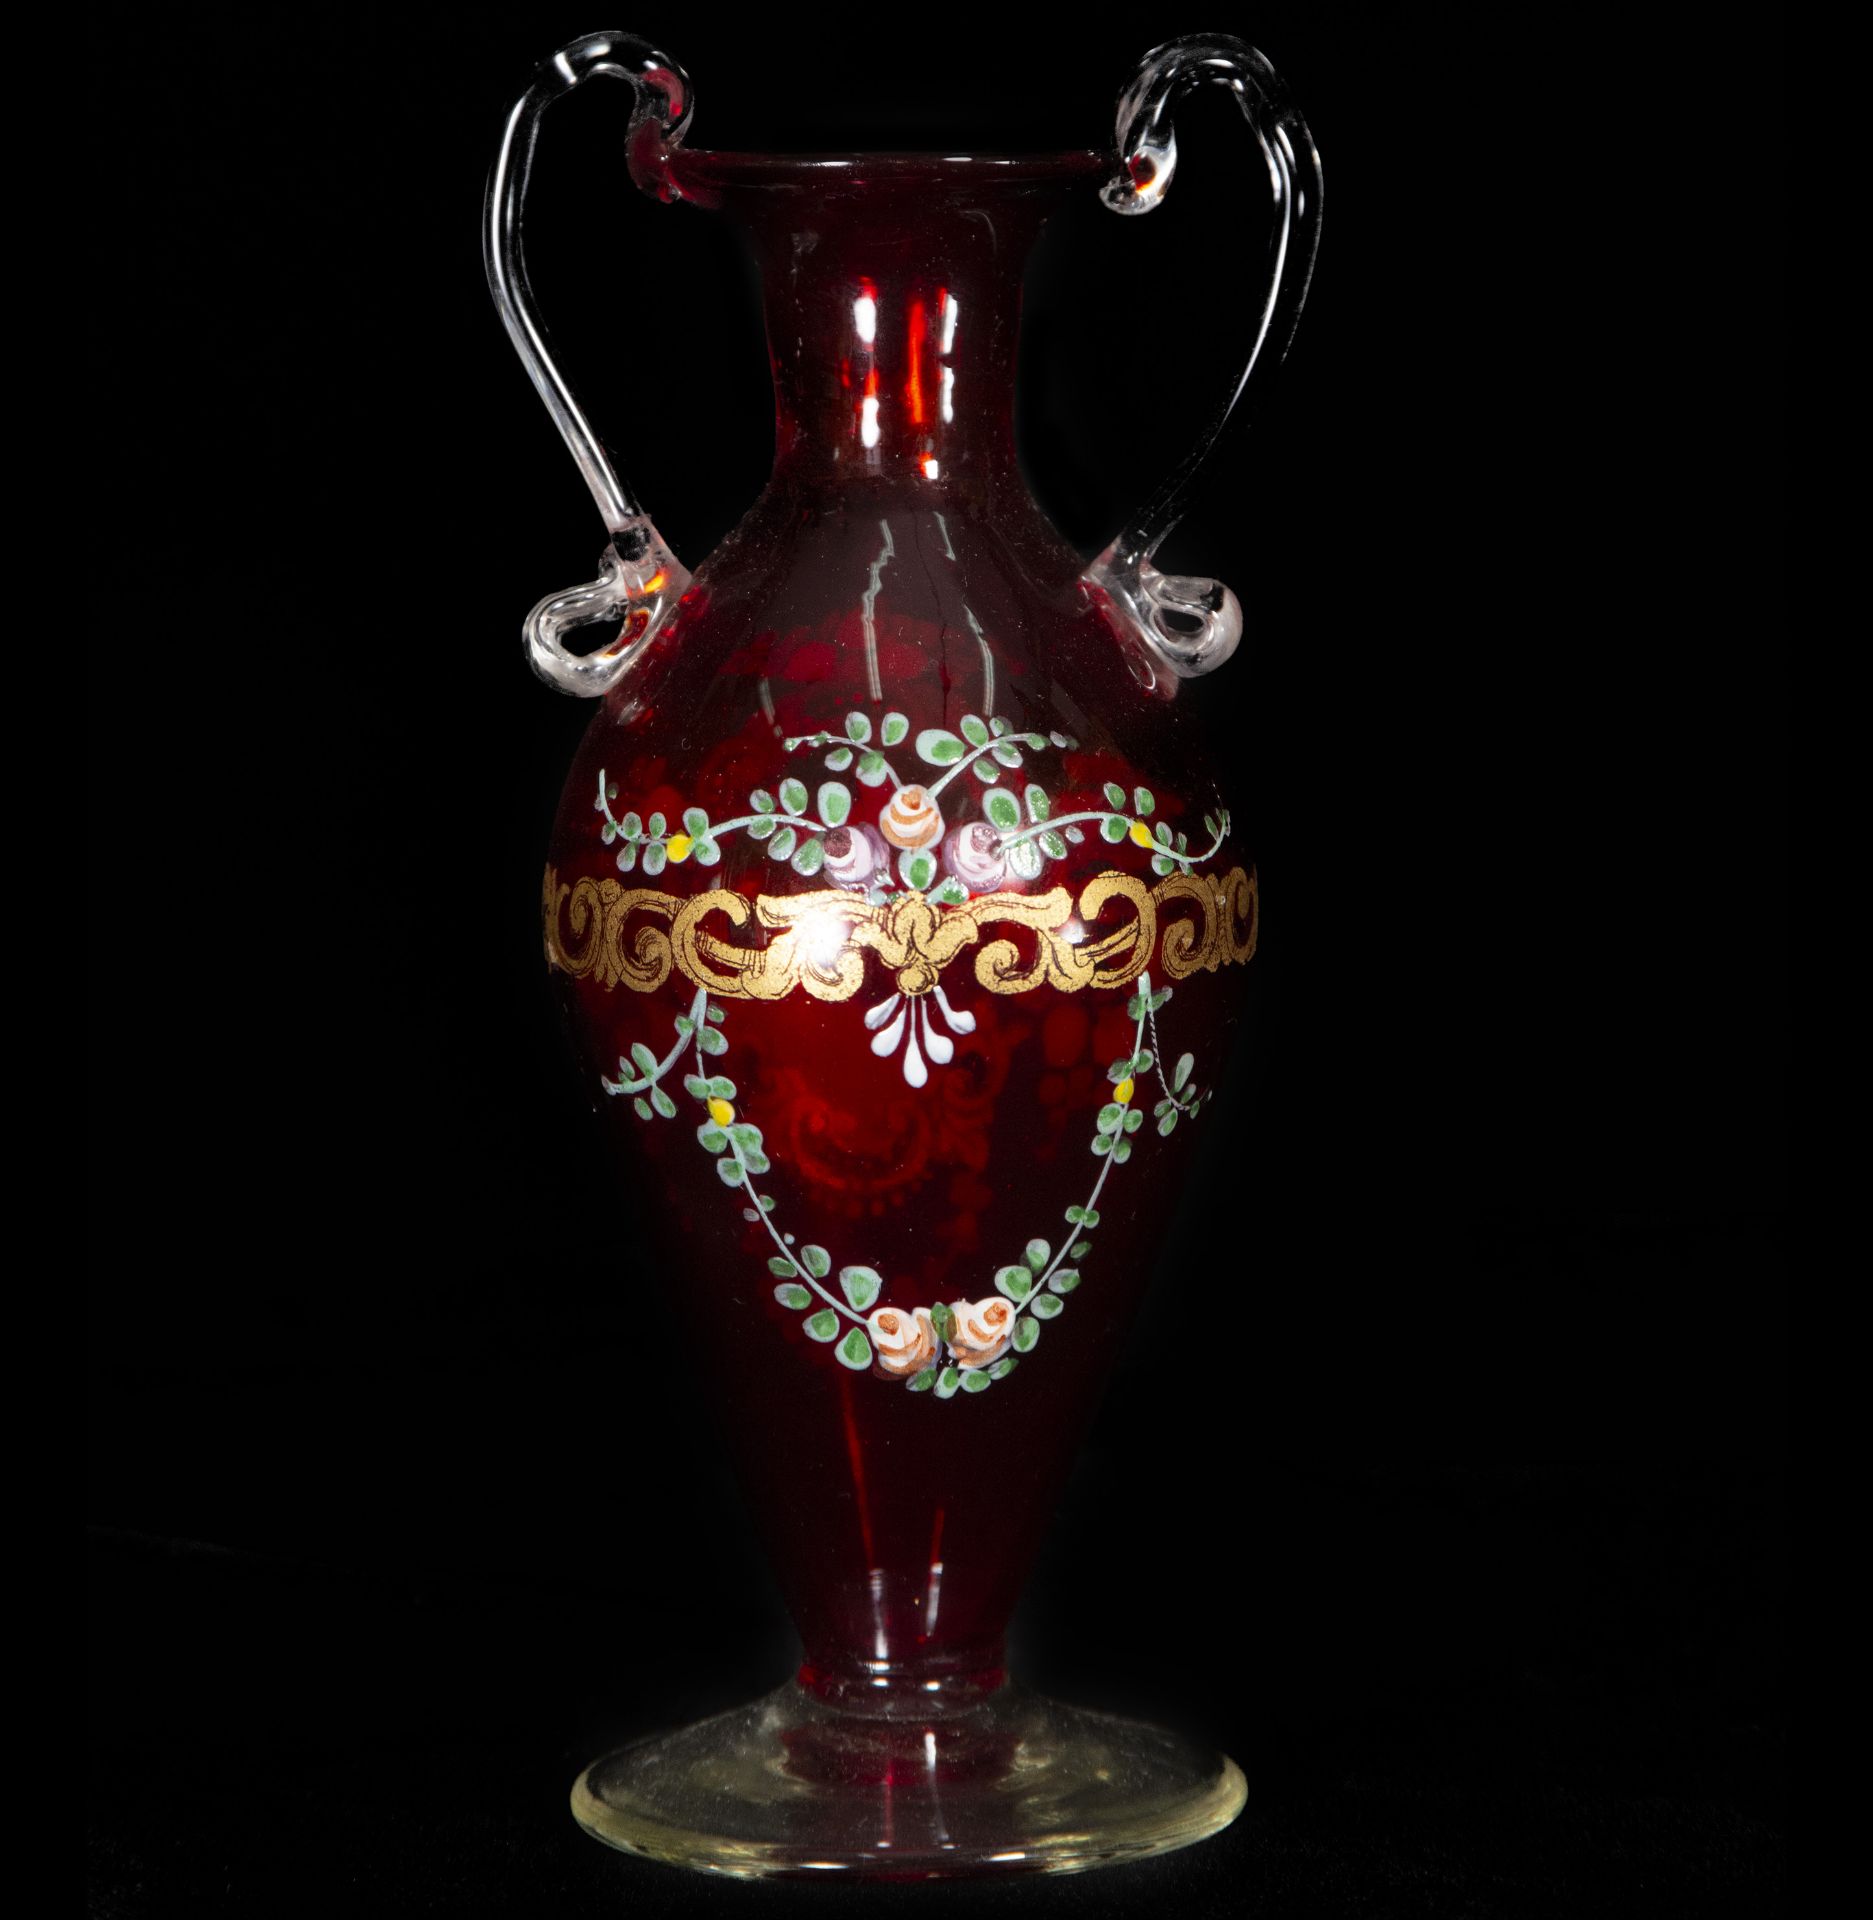 Bohemian glass cup and bottle, 19th century - Image 4 of 6